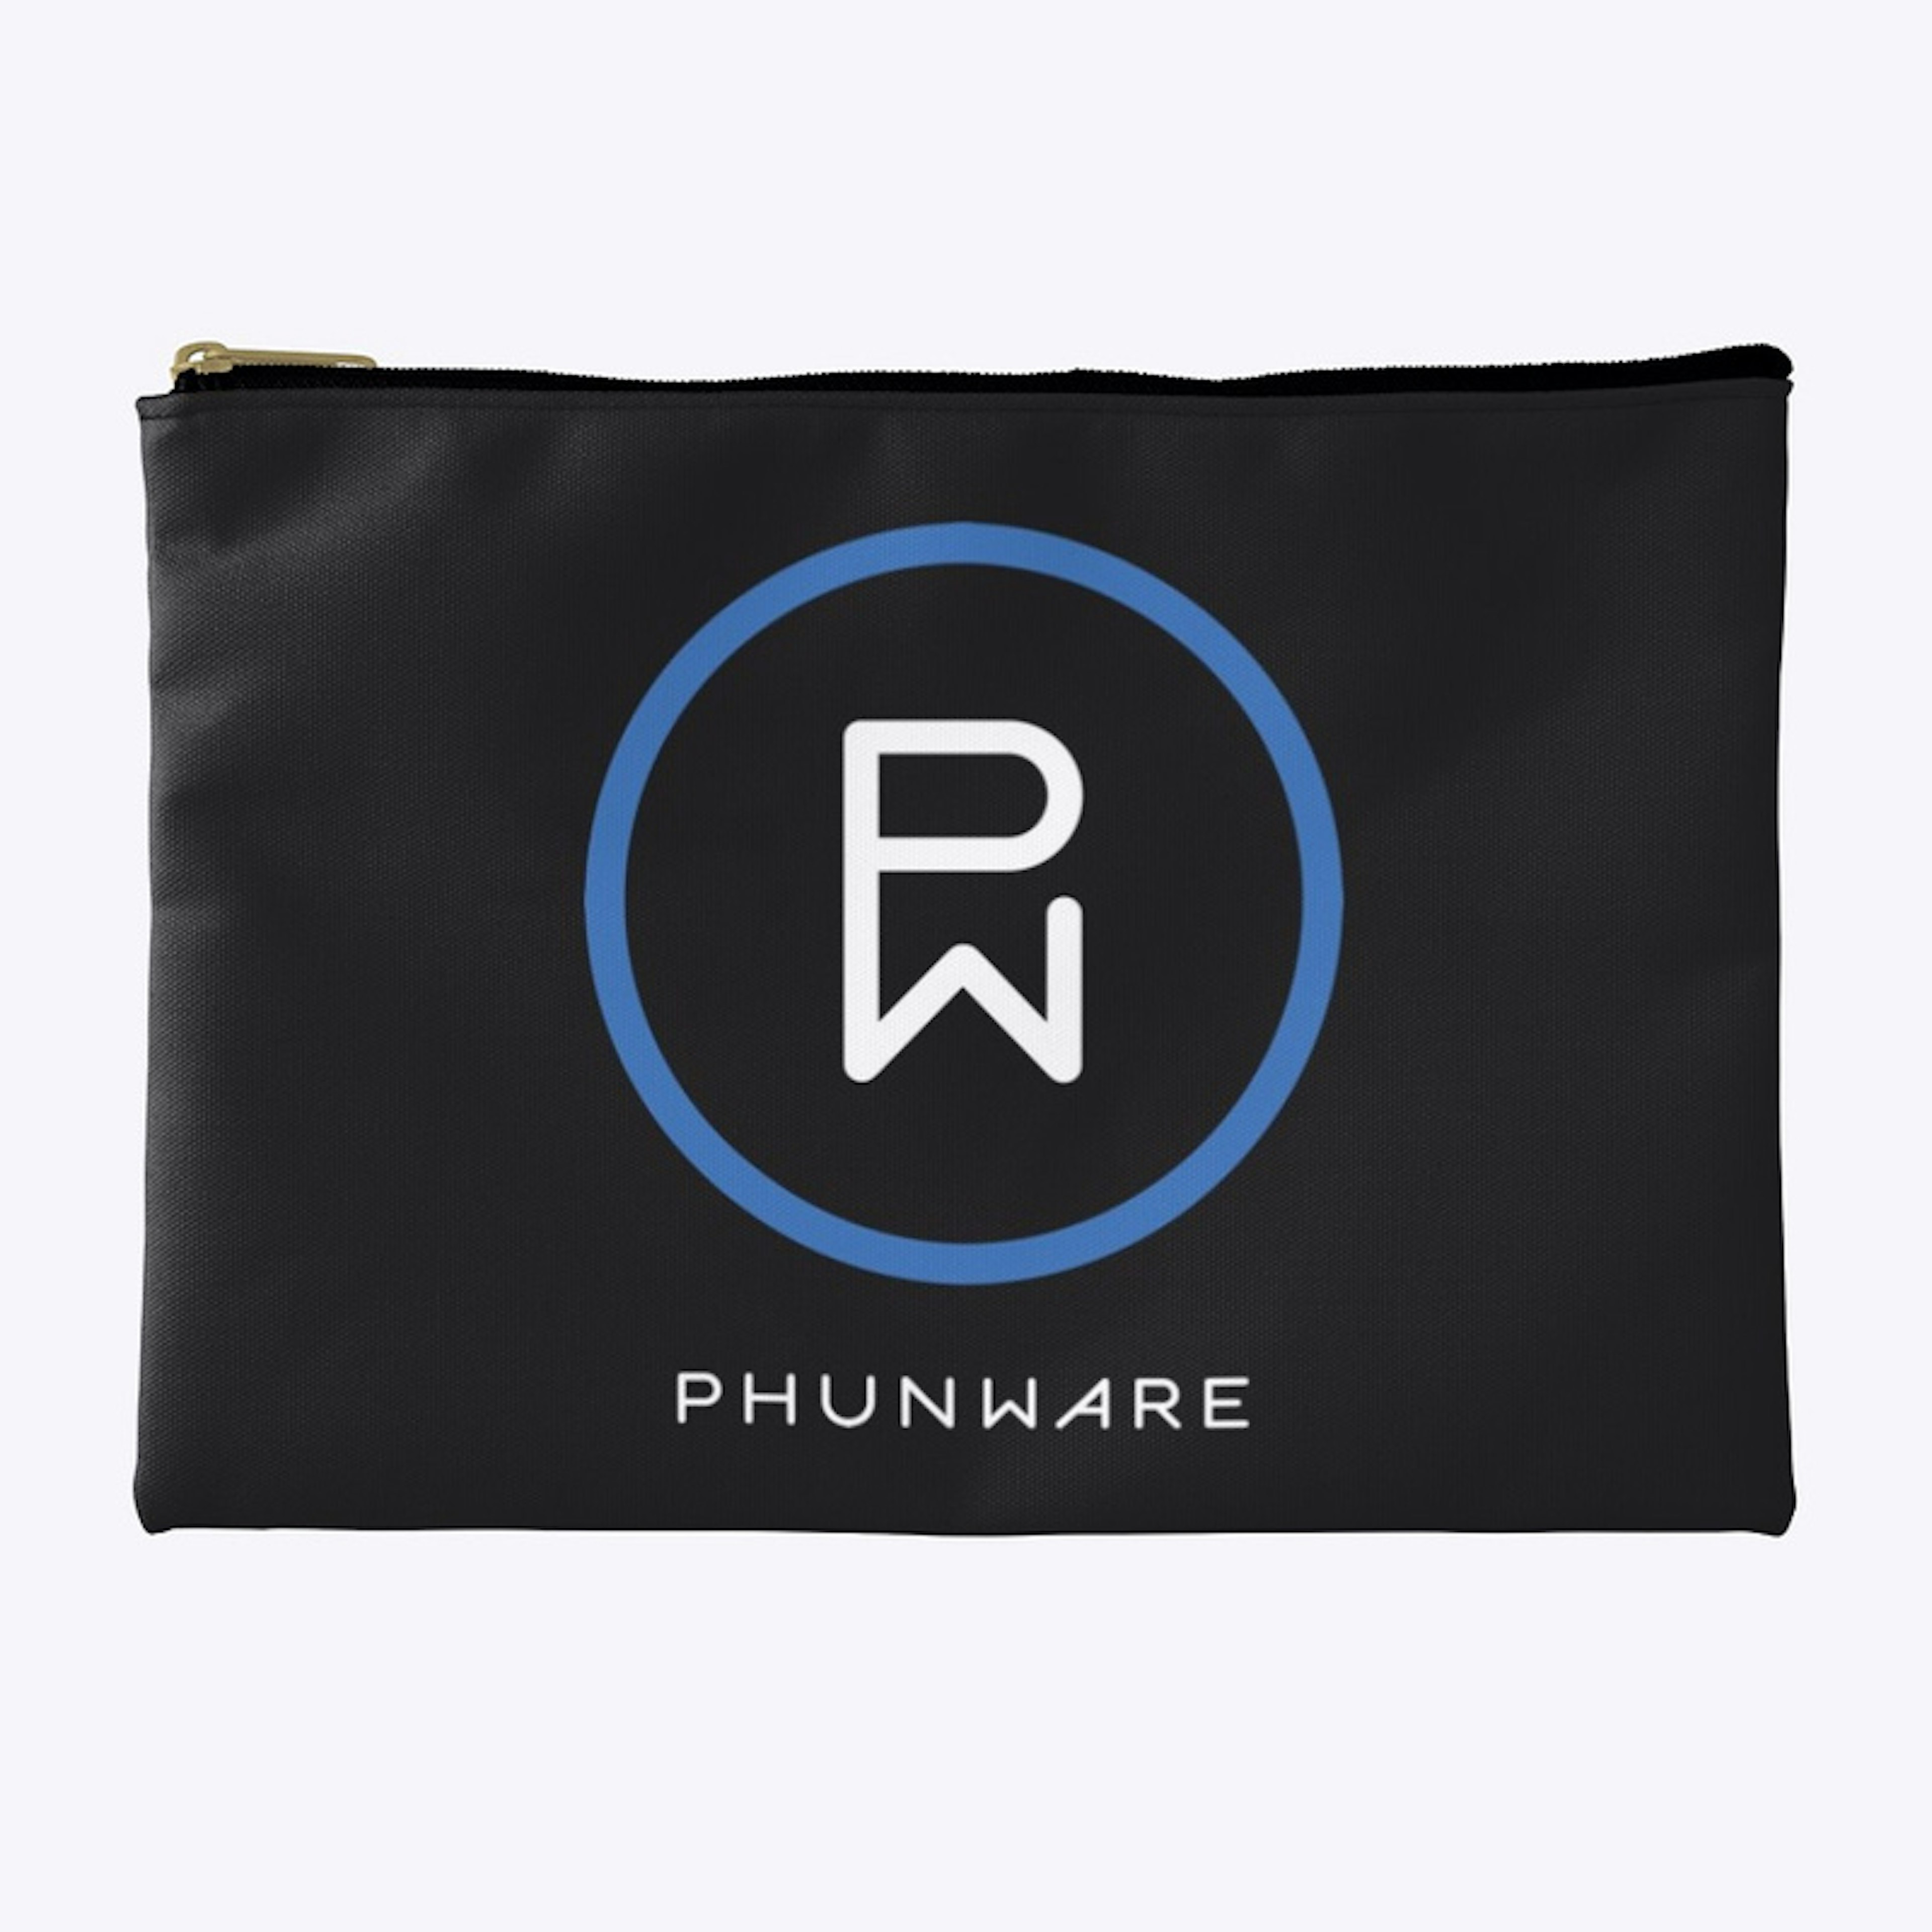 Phunware Accessory Pouch